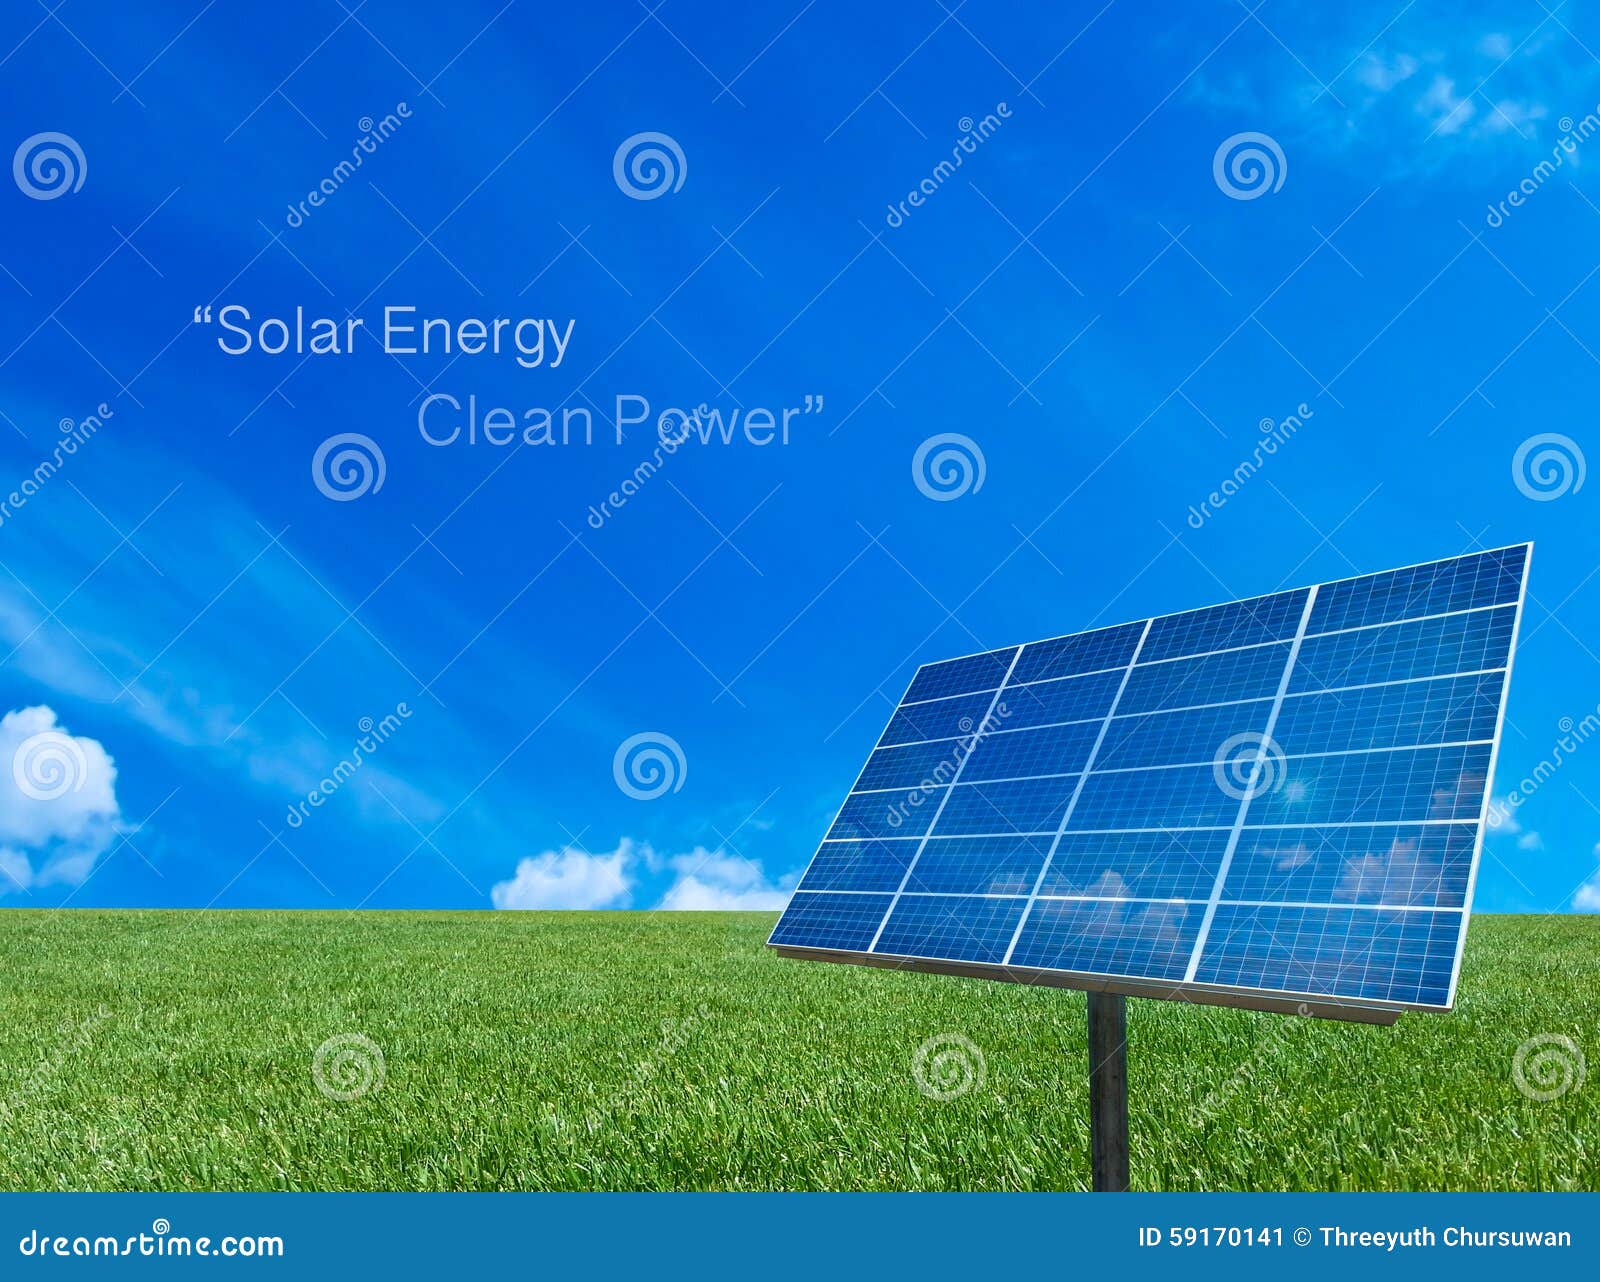 Solar Cell Power Energy Grid System in Idea Concept Background Stock Image  - Image of industries, environment: 59170141